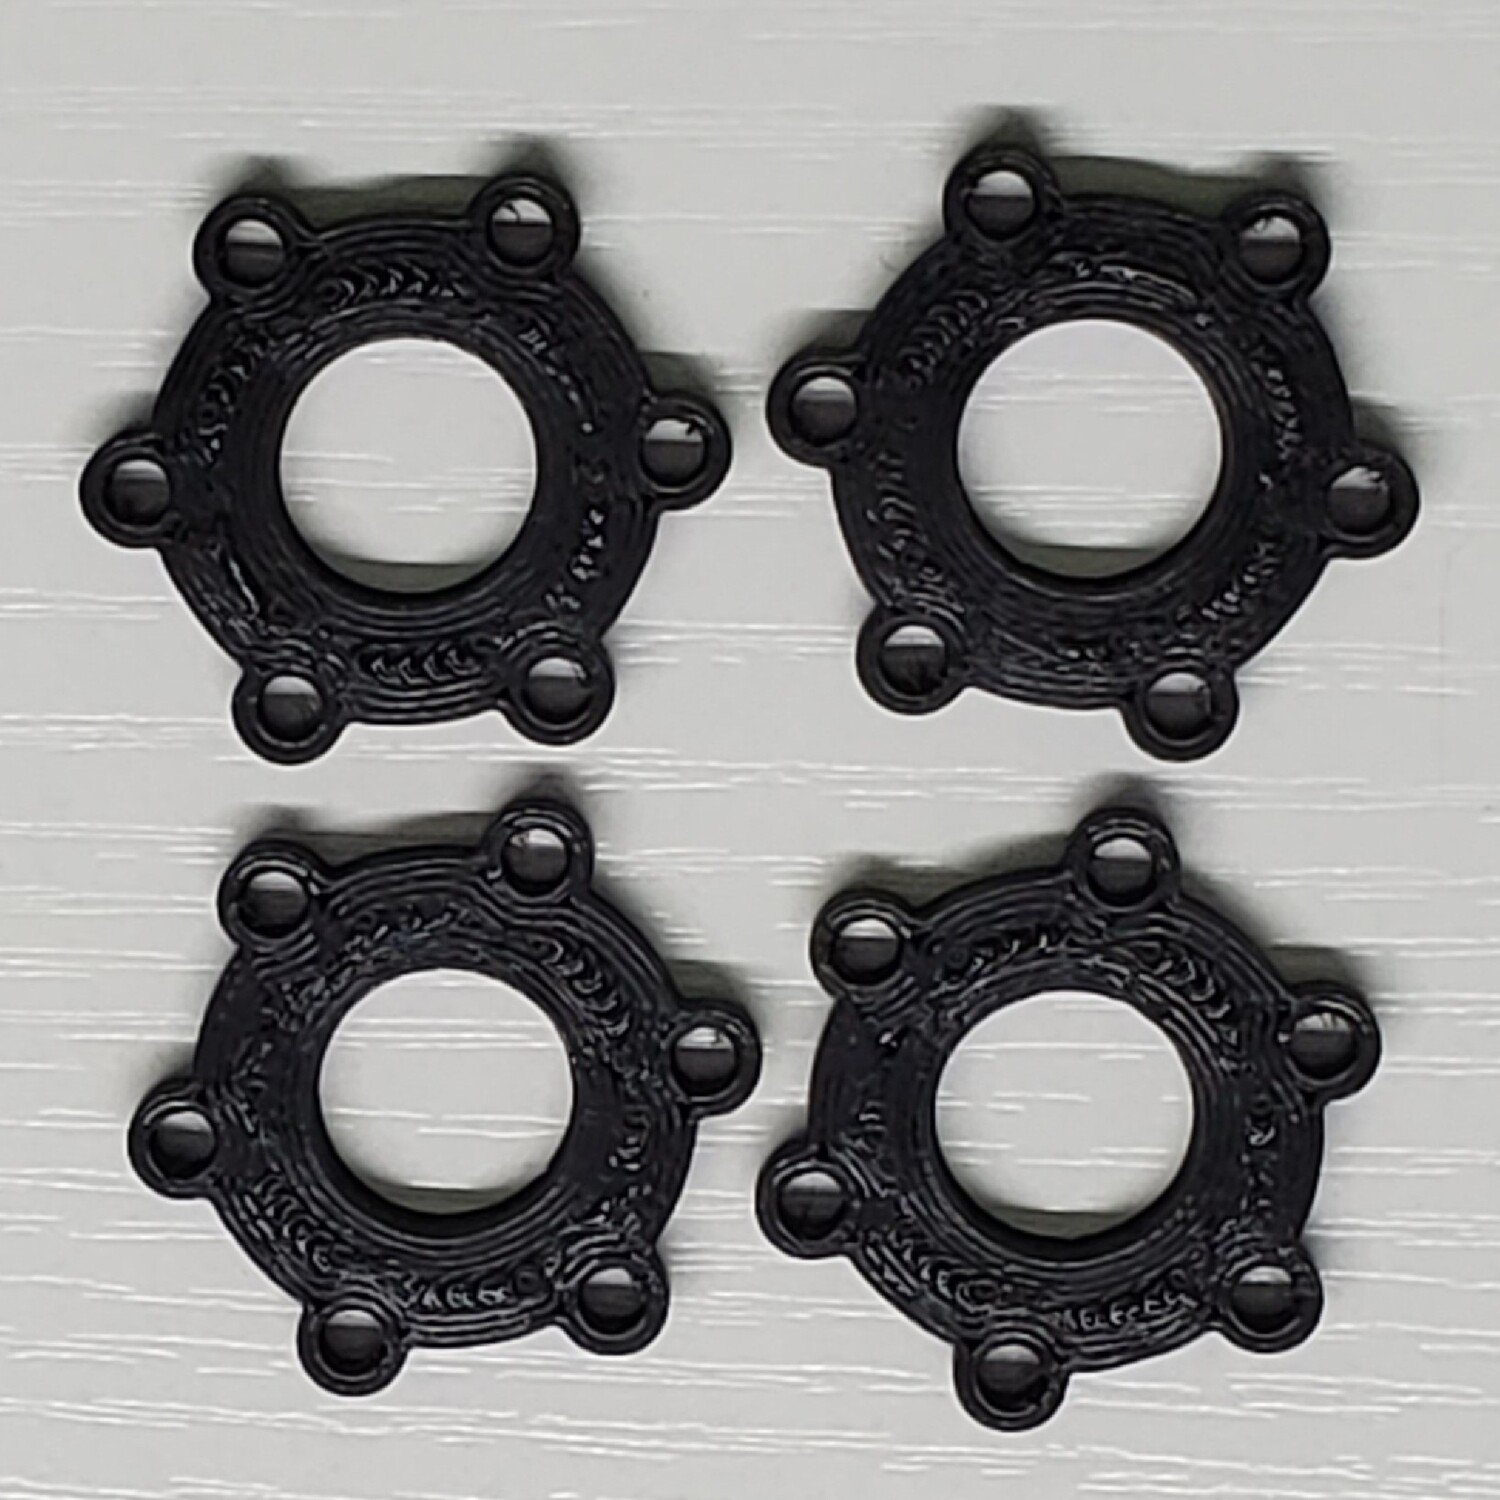 Jconcept style Wheel Hub Spacers for aluminum wheel spacers